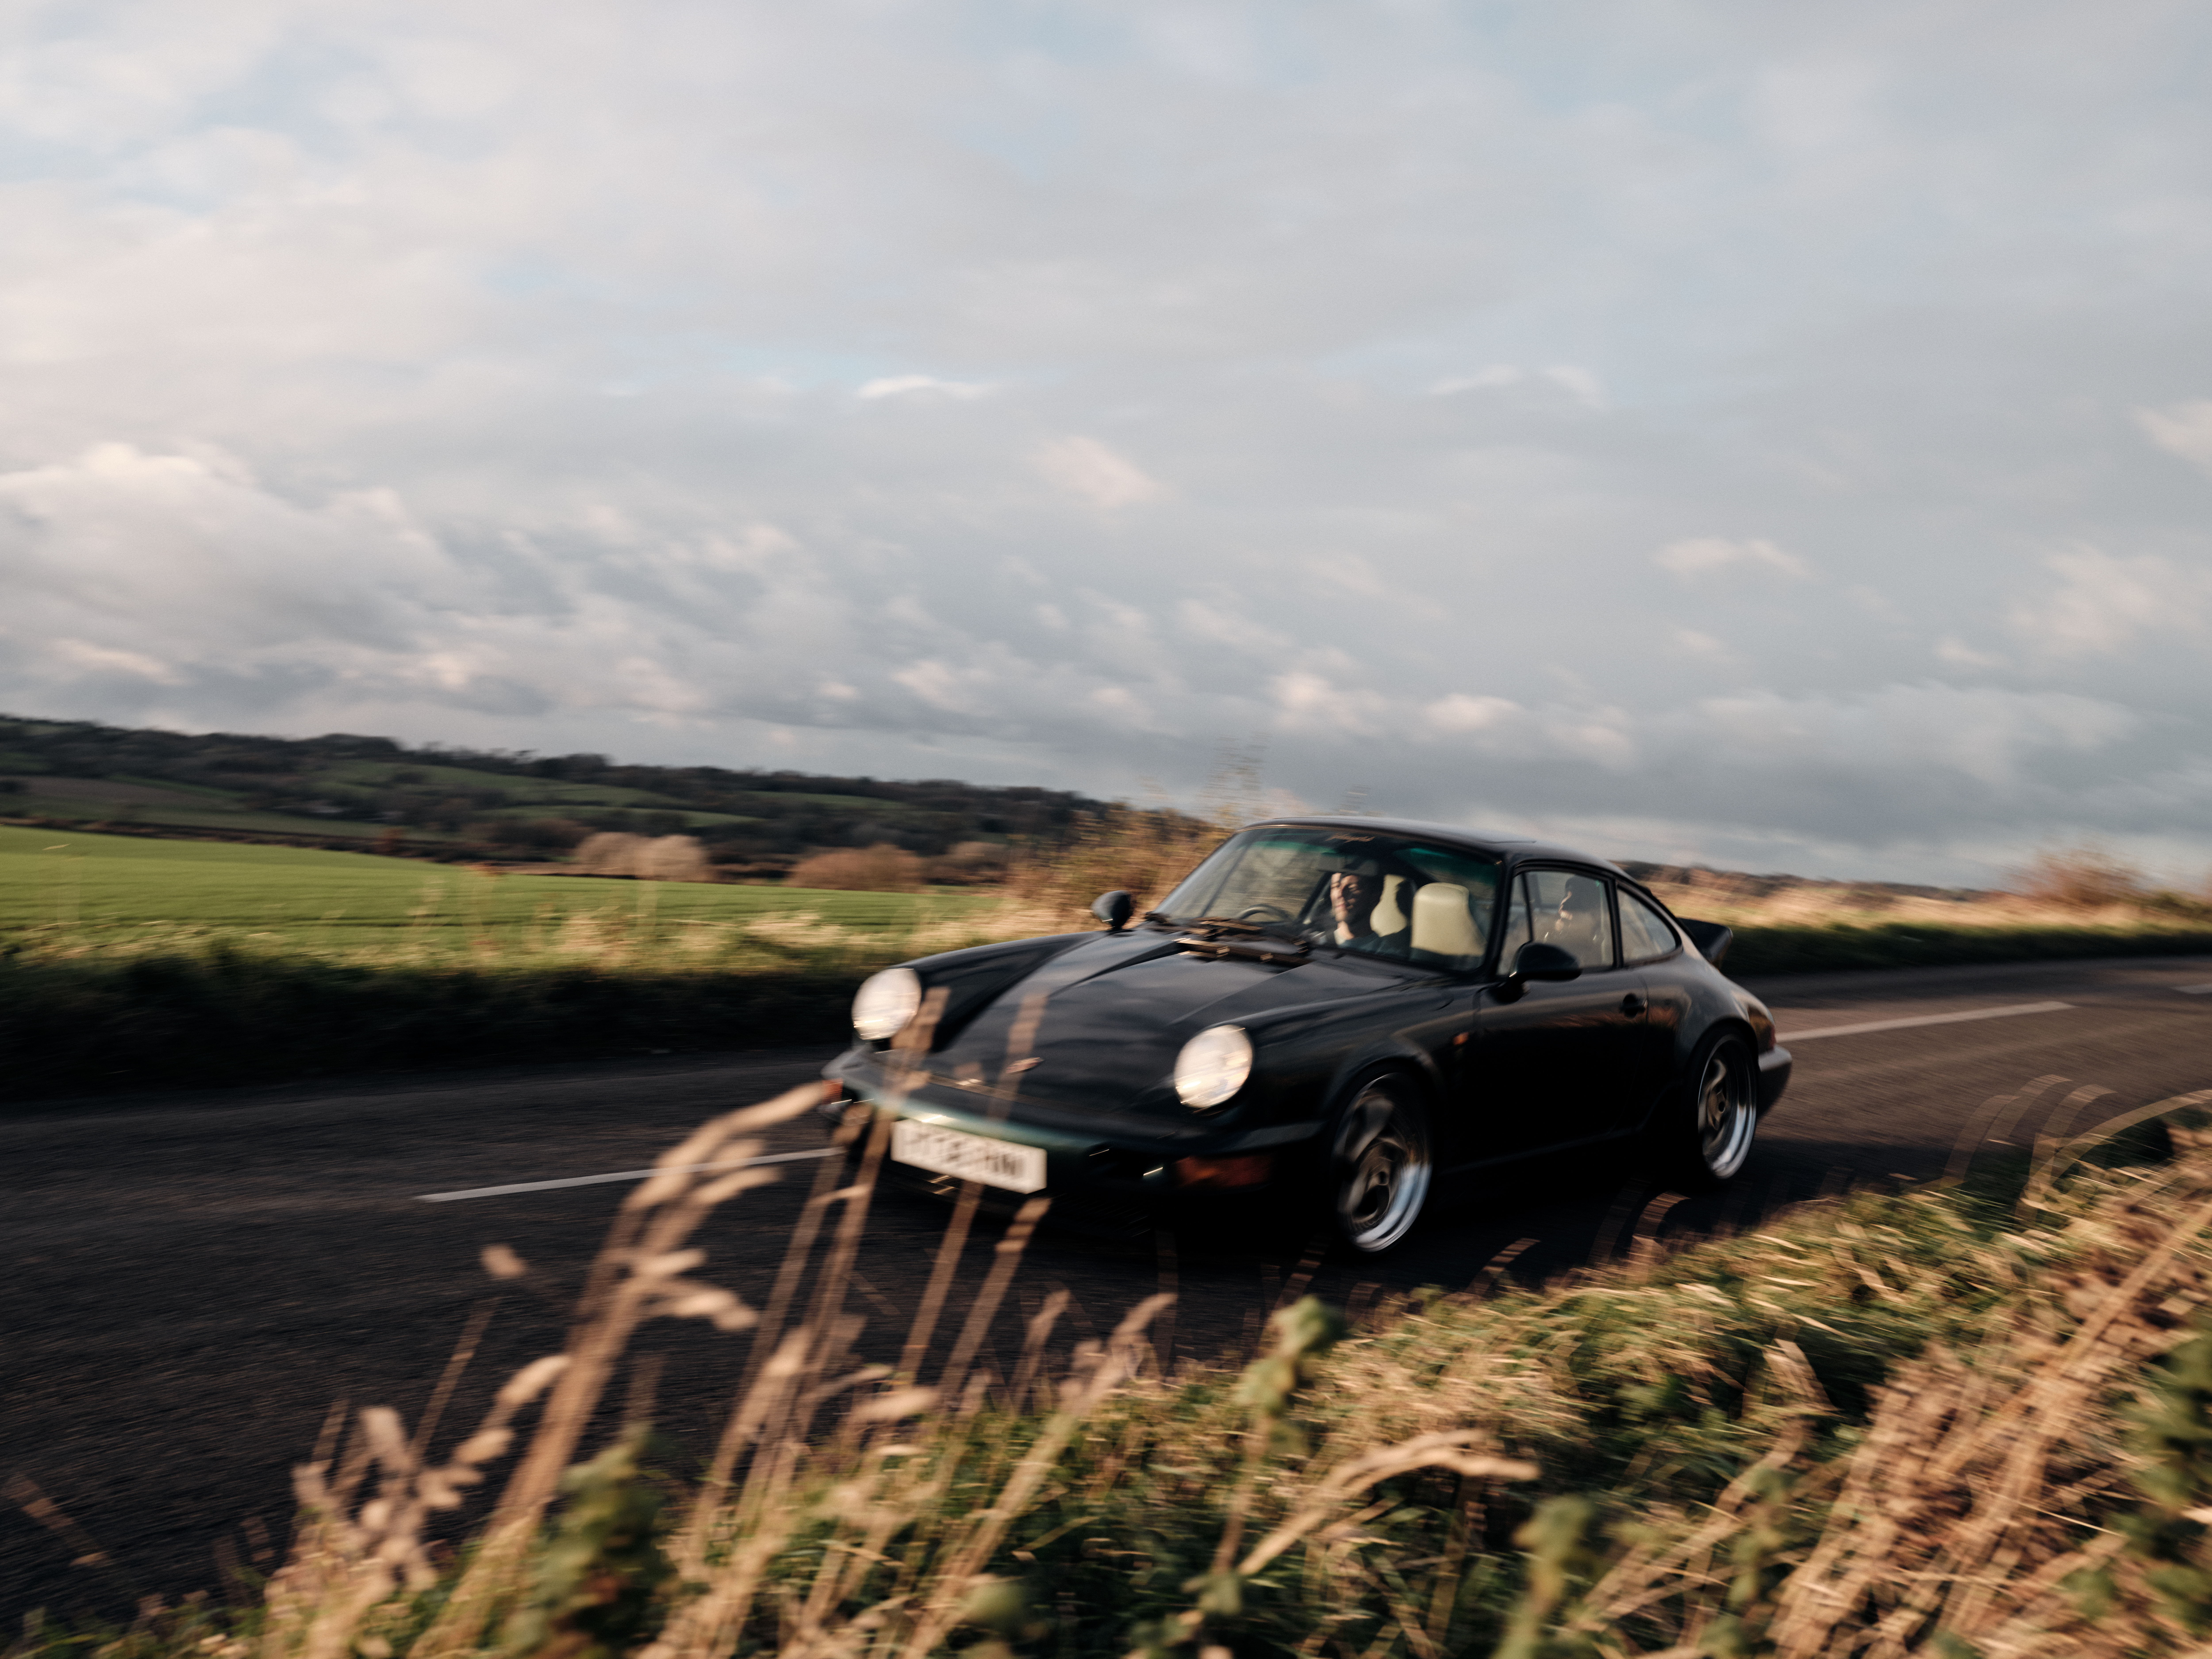 A classic Porsche 911 driving along a country road